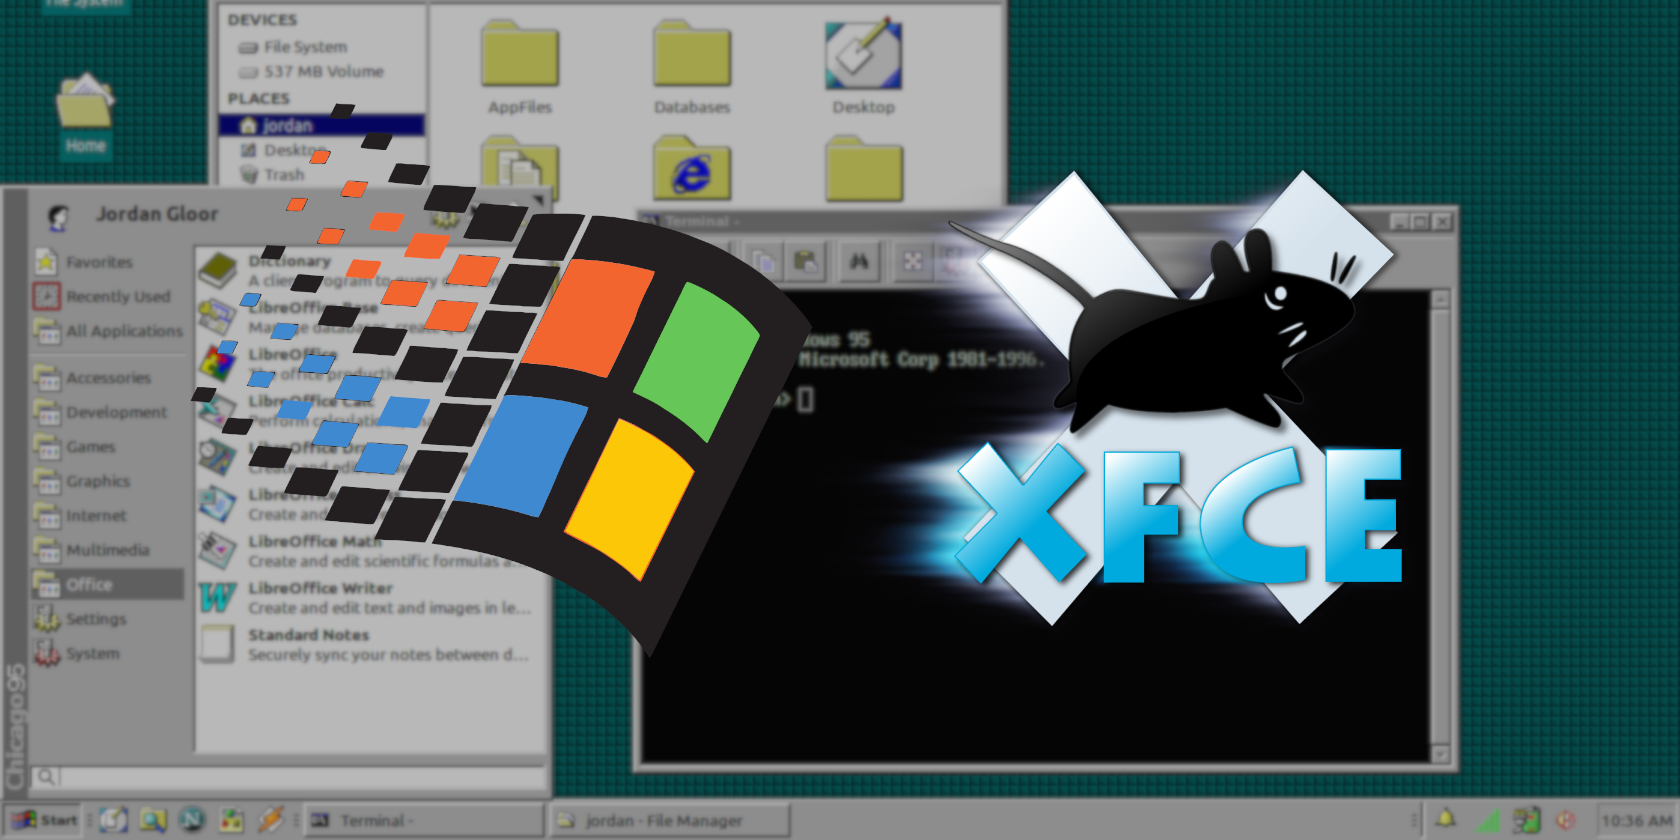 Windows 95 and XFCE Logos Over Chicago95 Theme